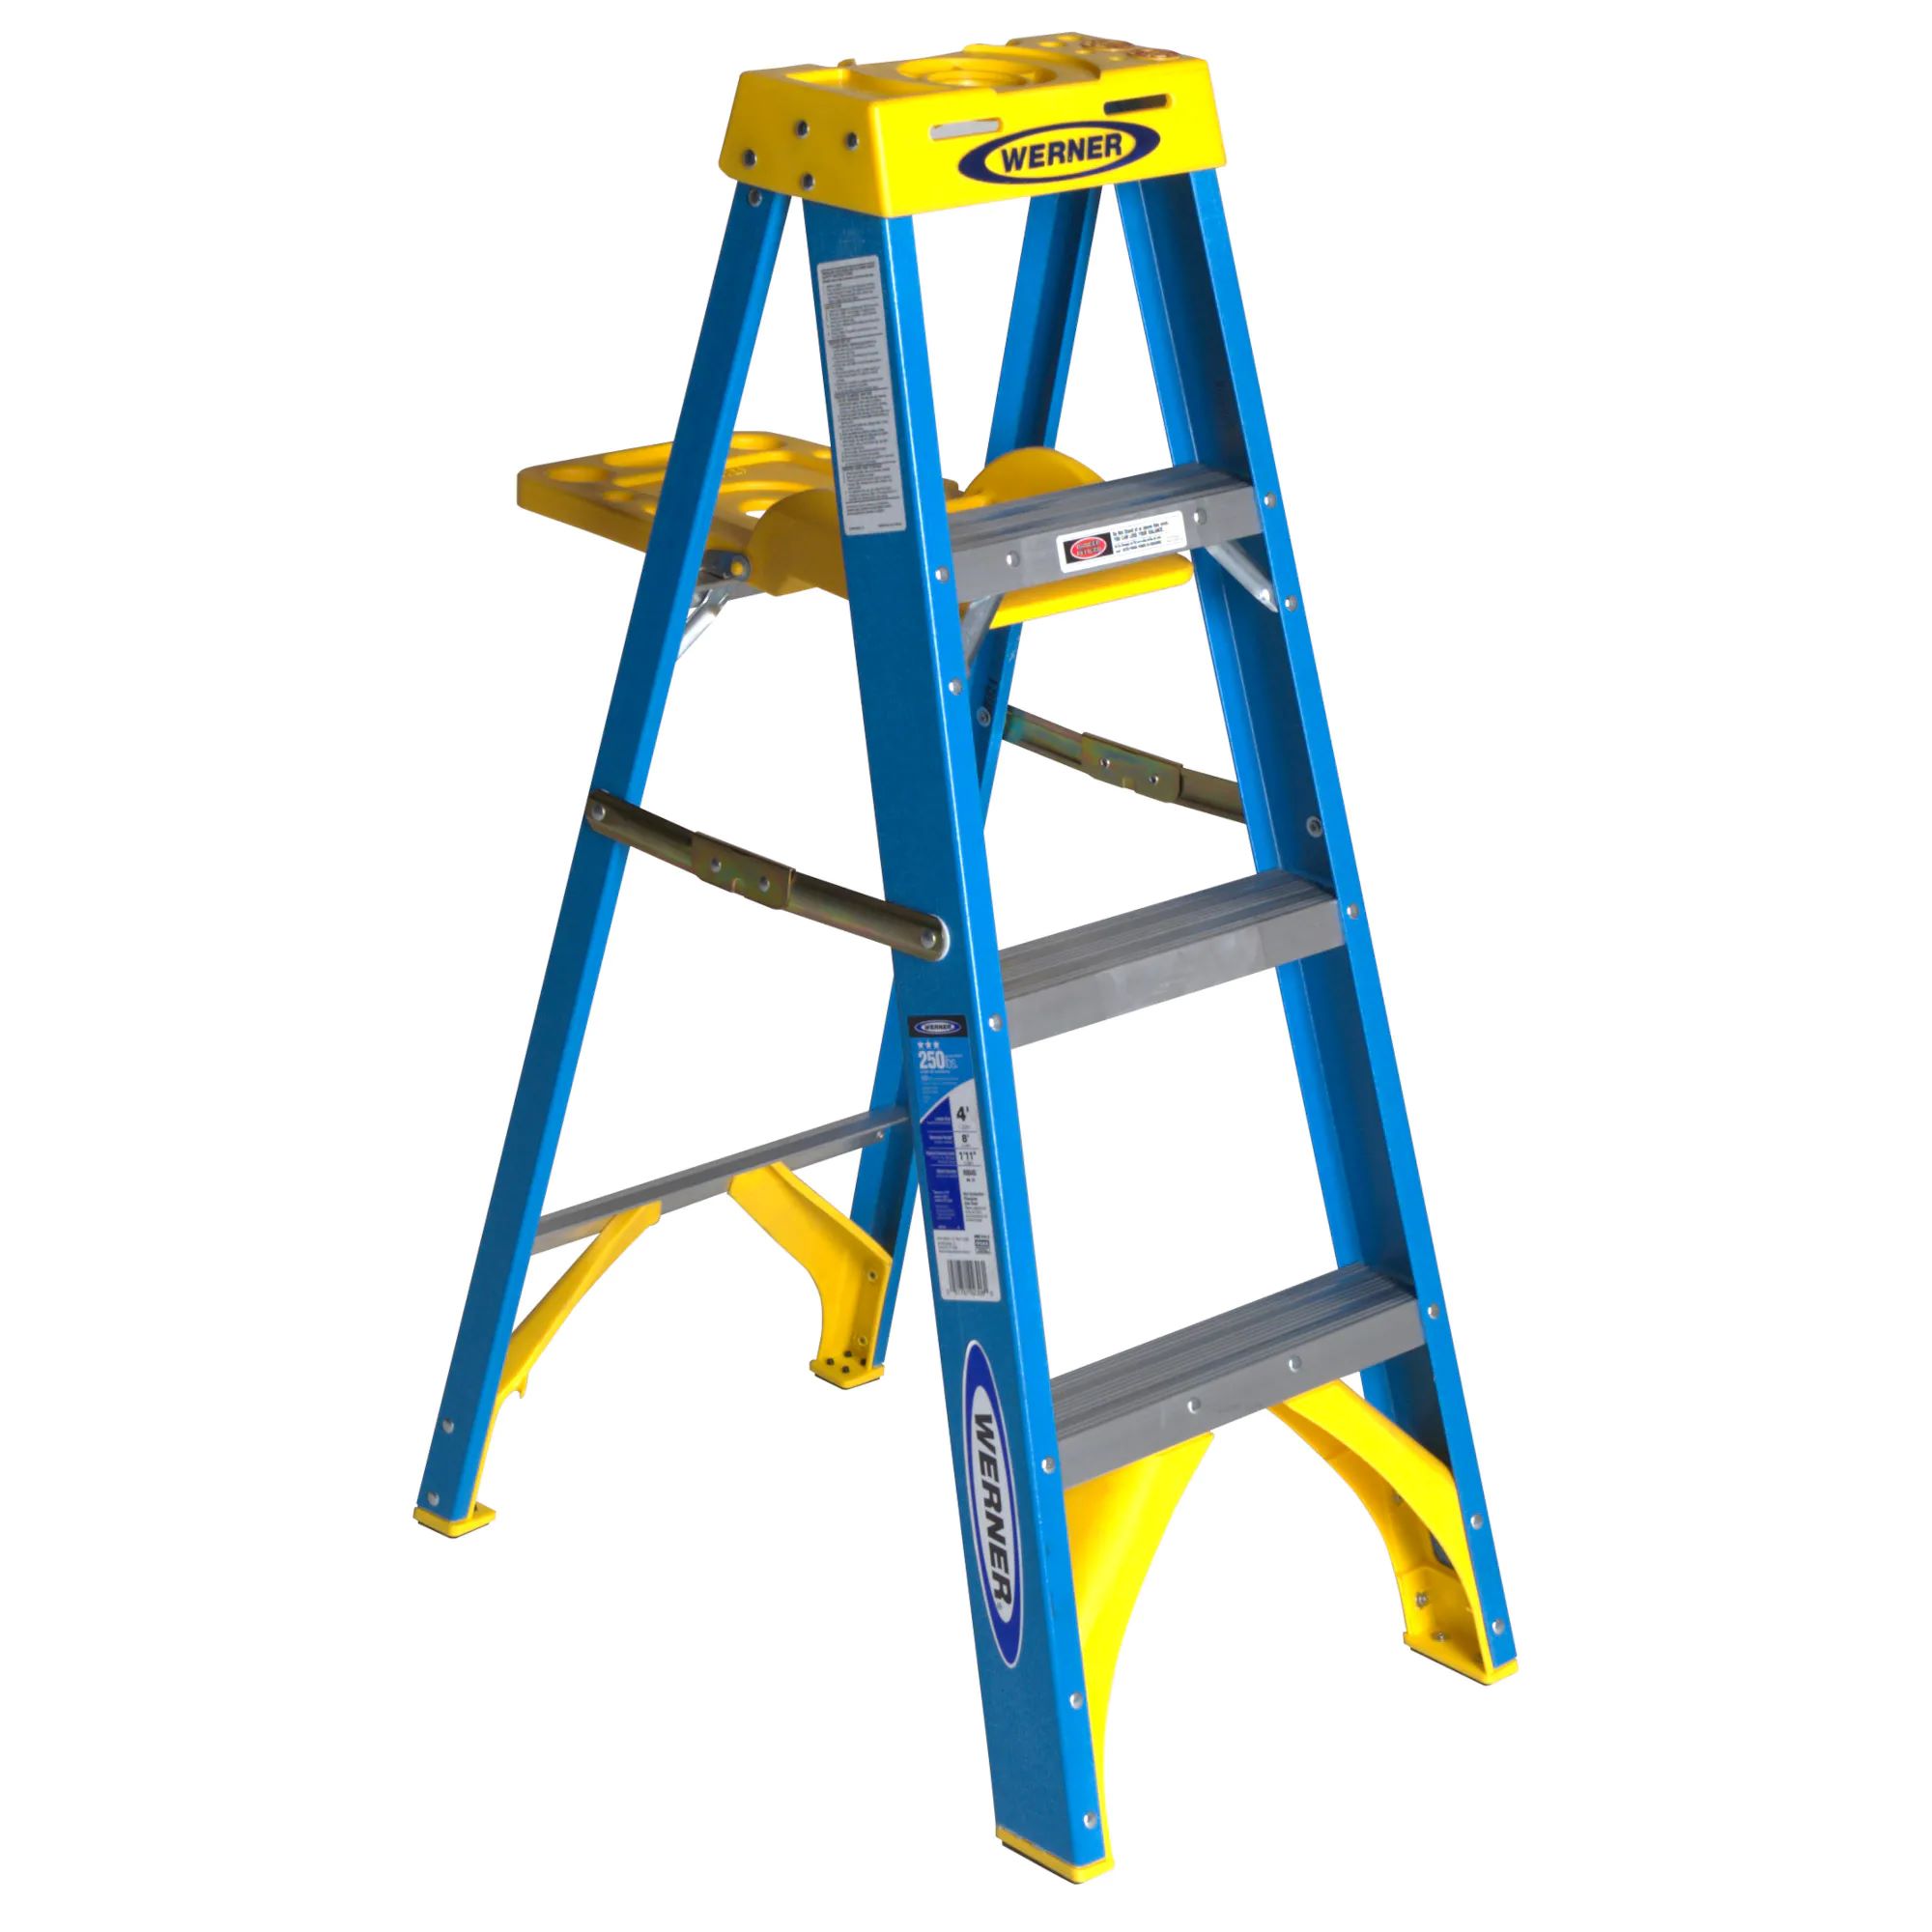 What Does Type 1 Ladder Mean